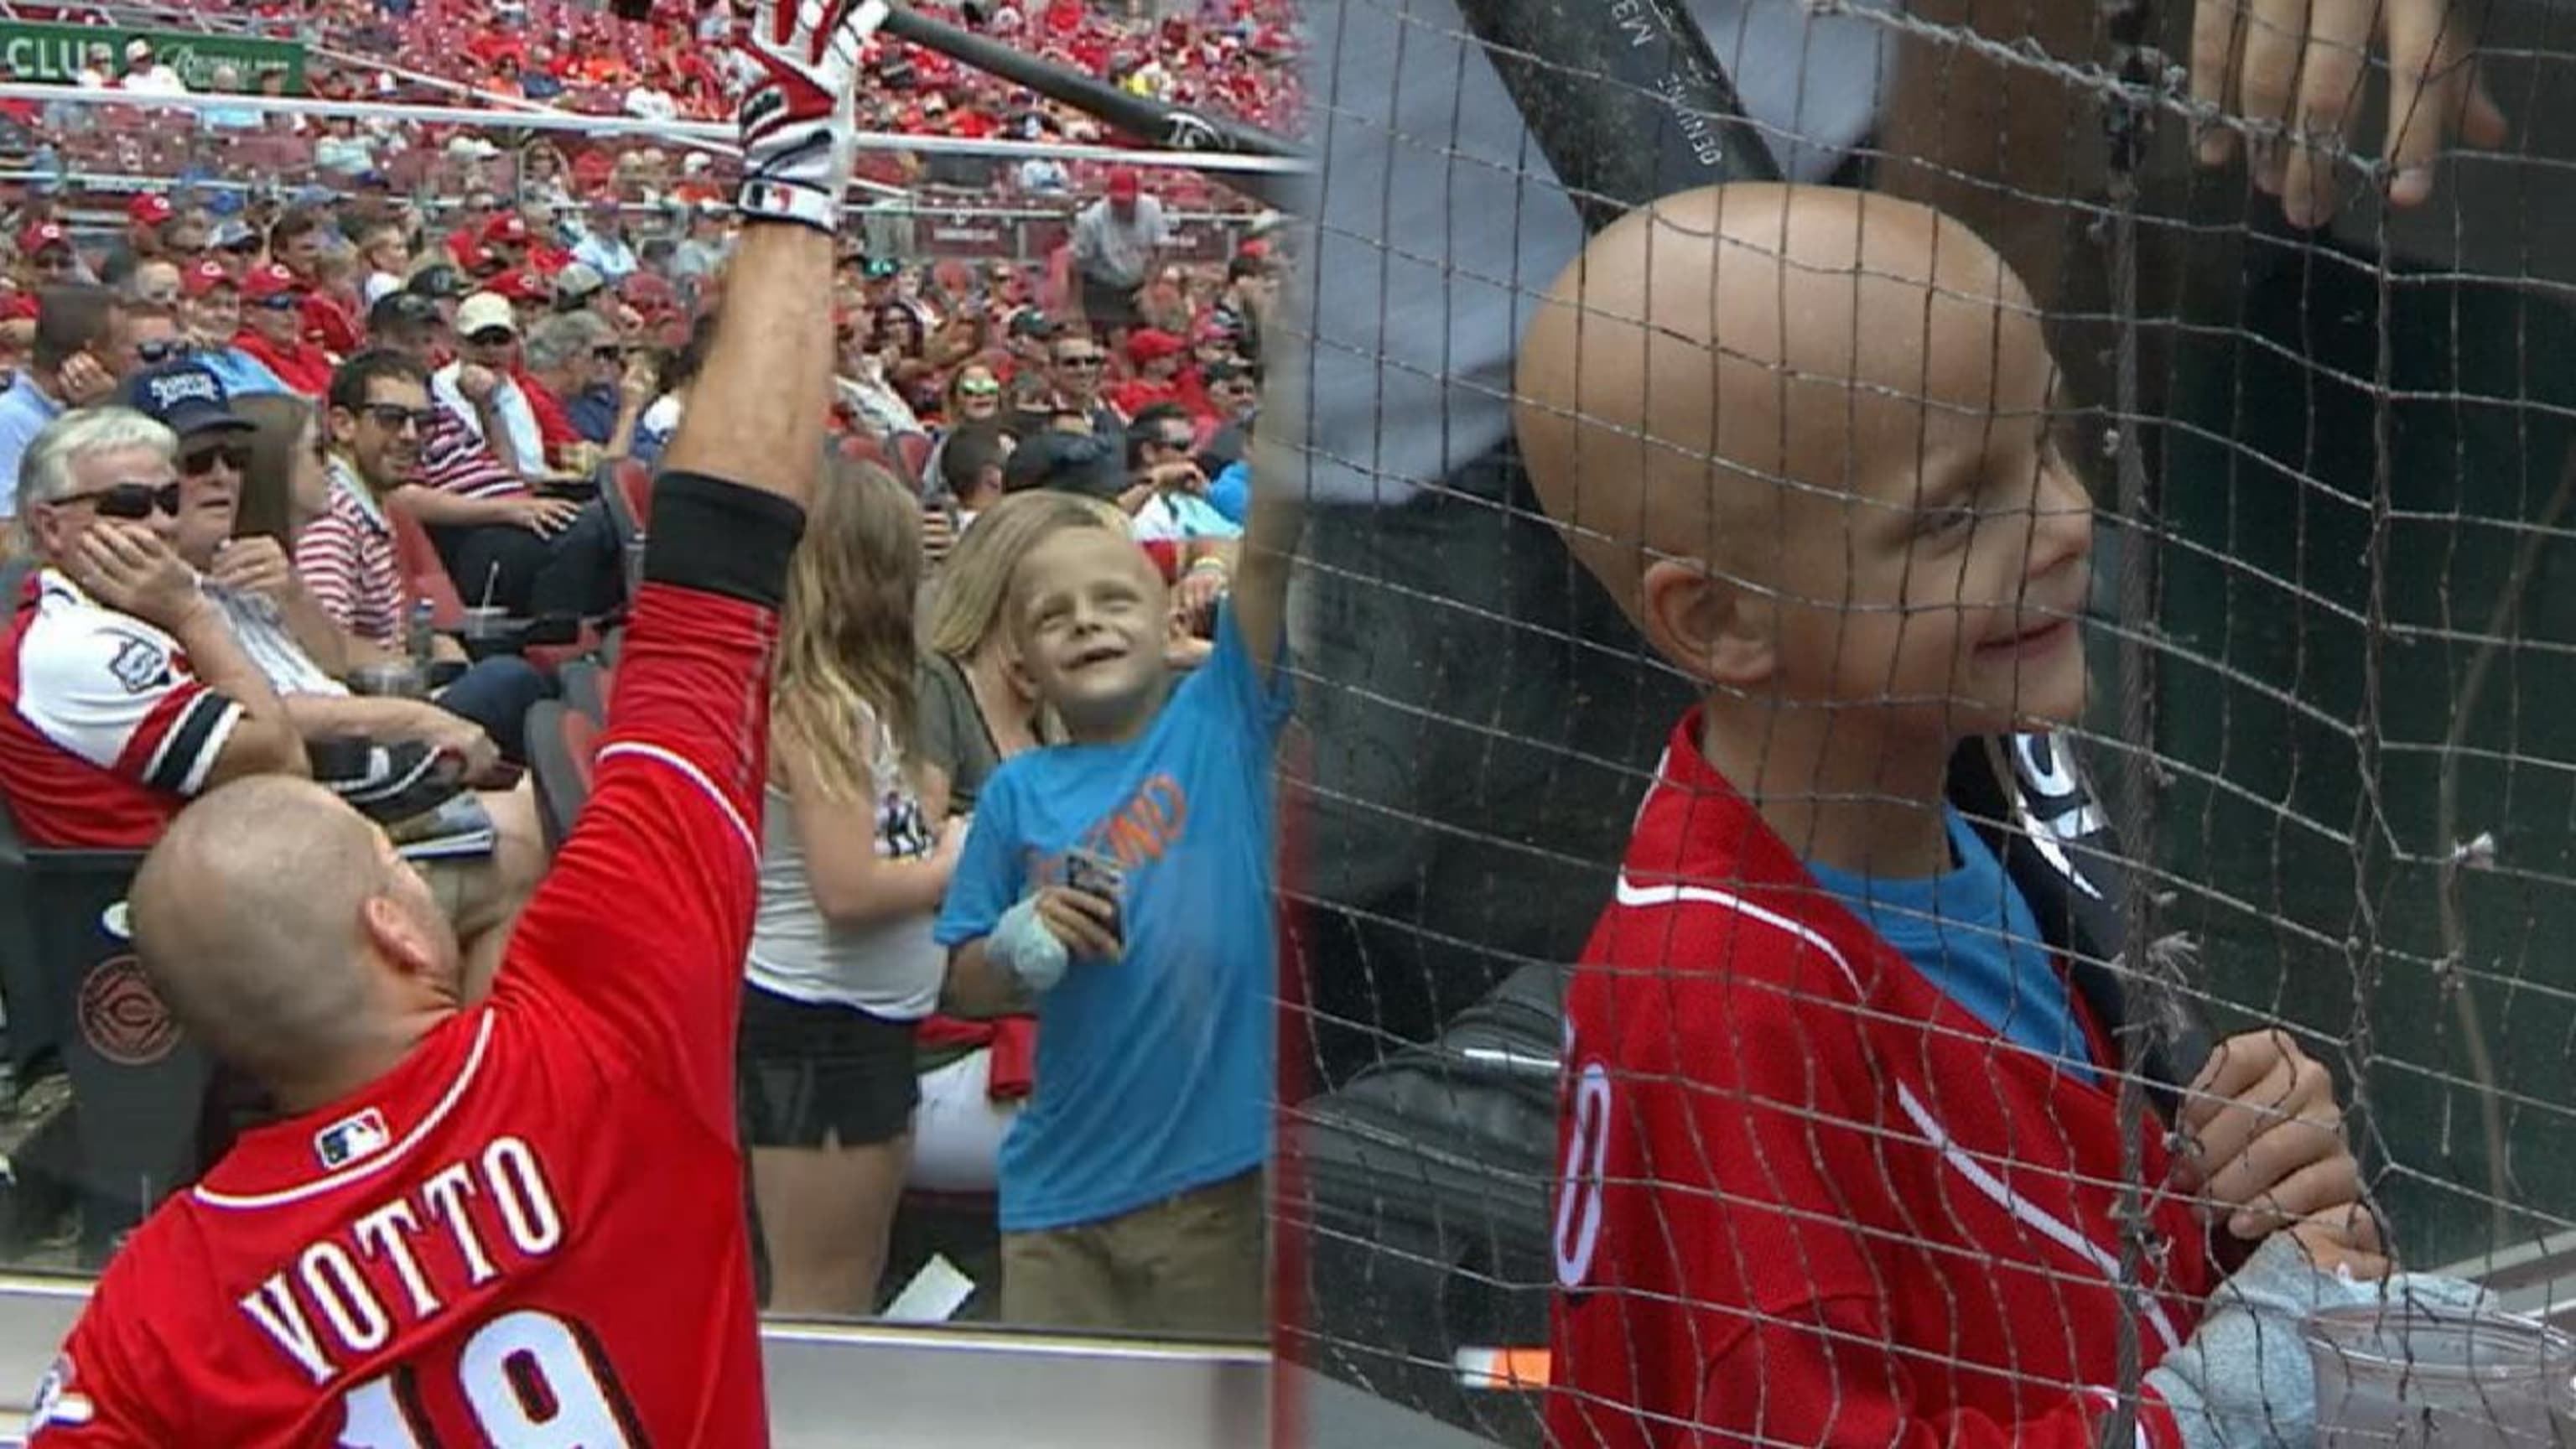 Young Joey Votto fan enjoys game, 06/20/2021